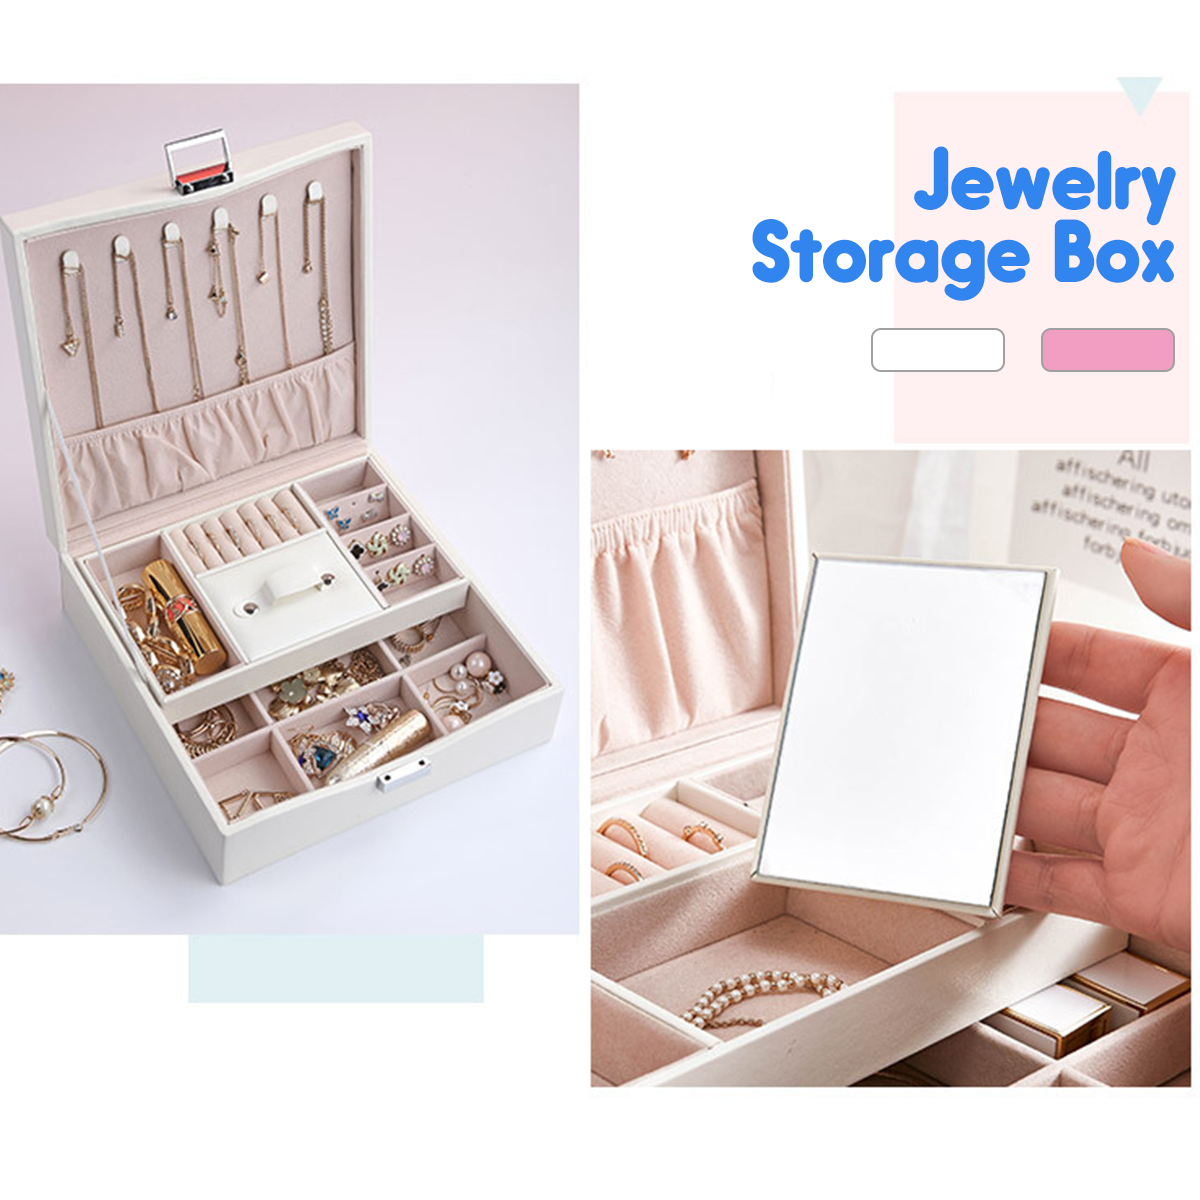 Flannel-Square-Jewelry-Box-Simple-Layout-2-Layers-Makeup-Organizer-Choker-Ring-Necklace-Storage-Box-1493604-2